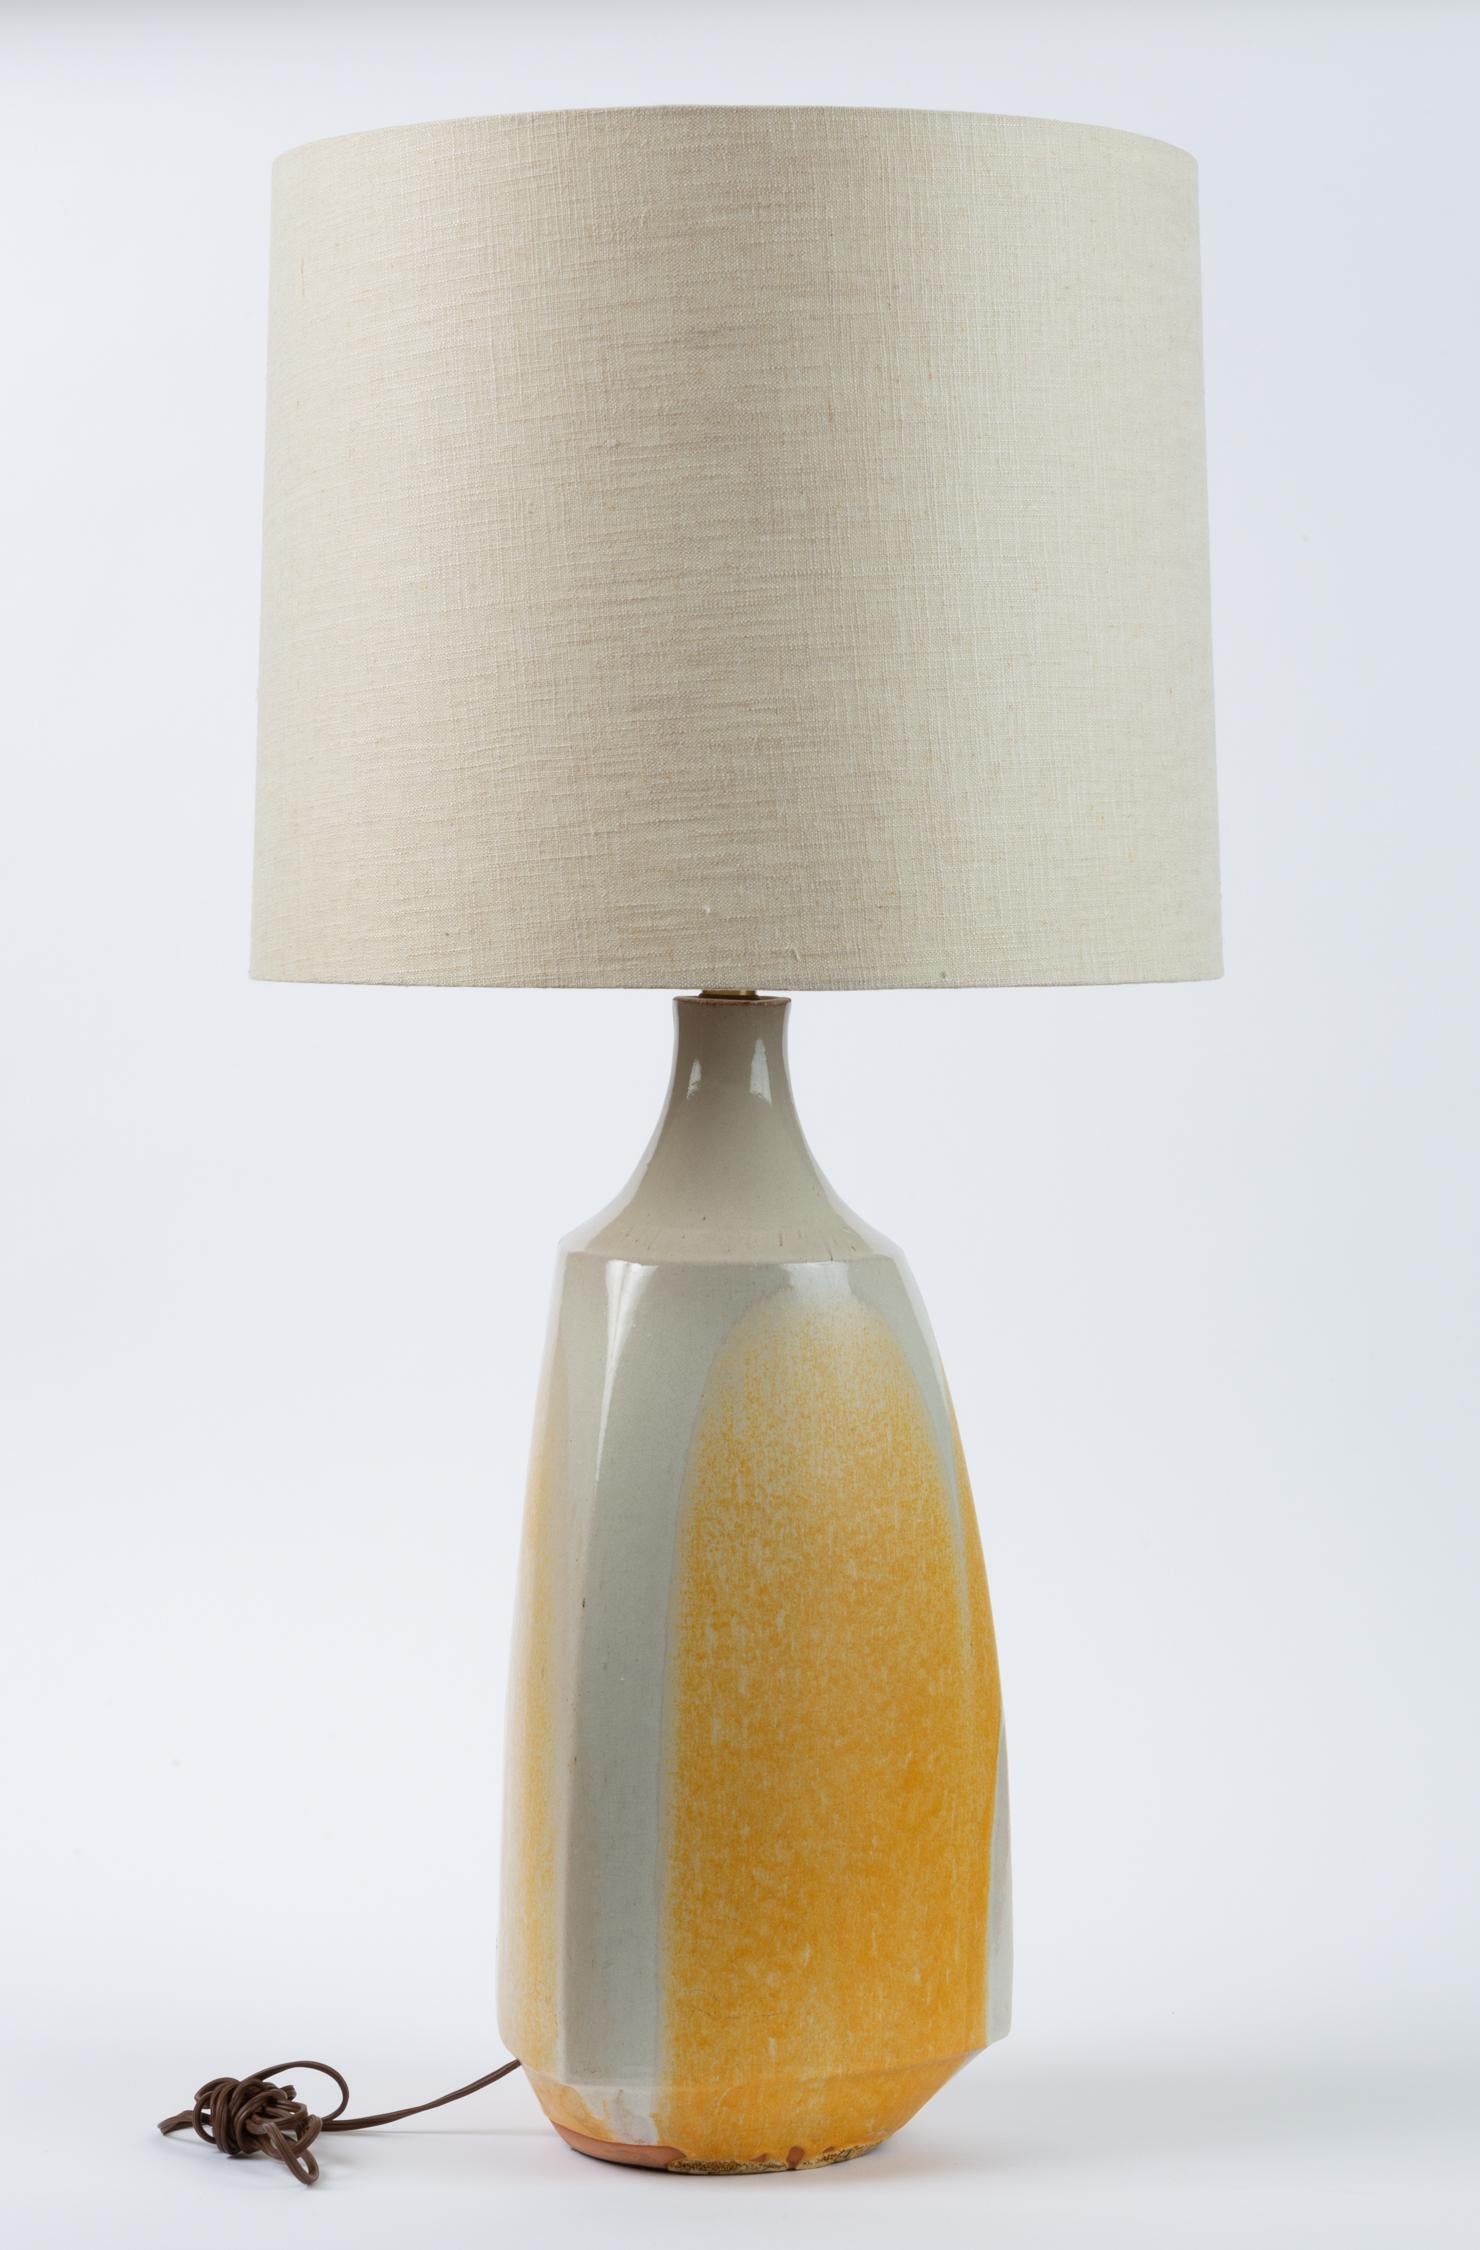 Mid-Century Modern Drip-Glaze Stoneware Lamp by David Cressey for Architectural Pottery